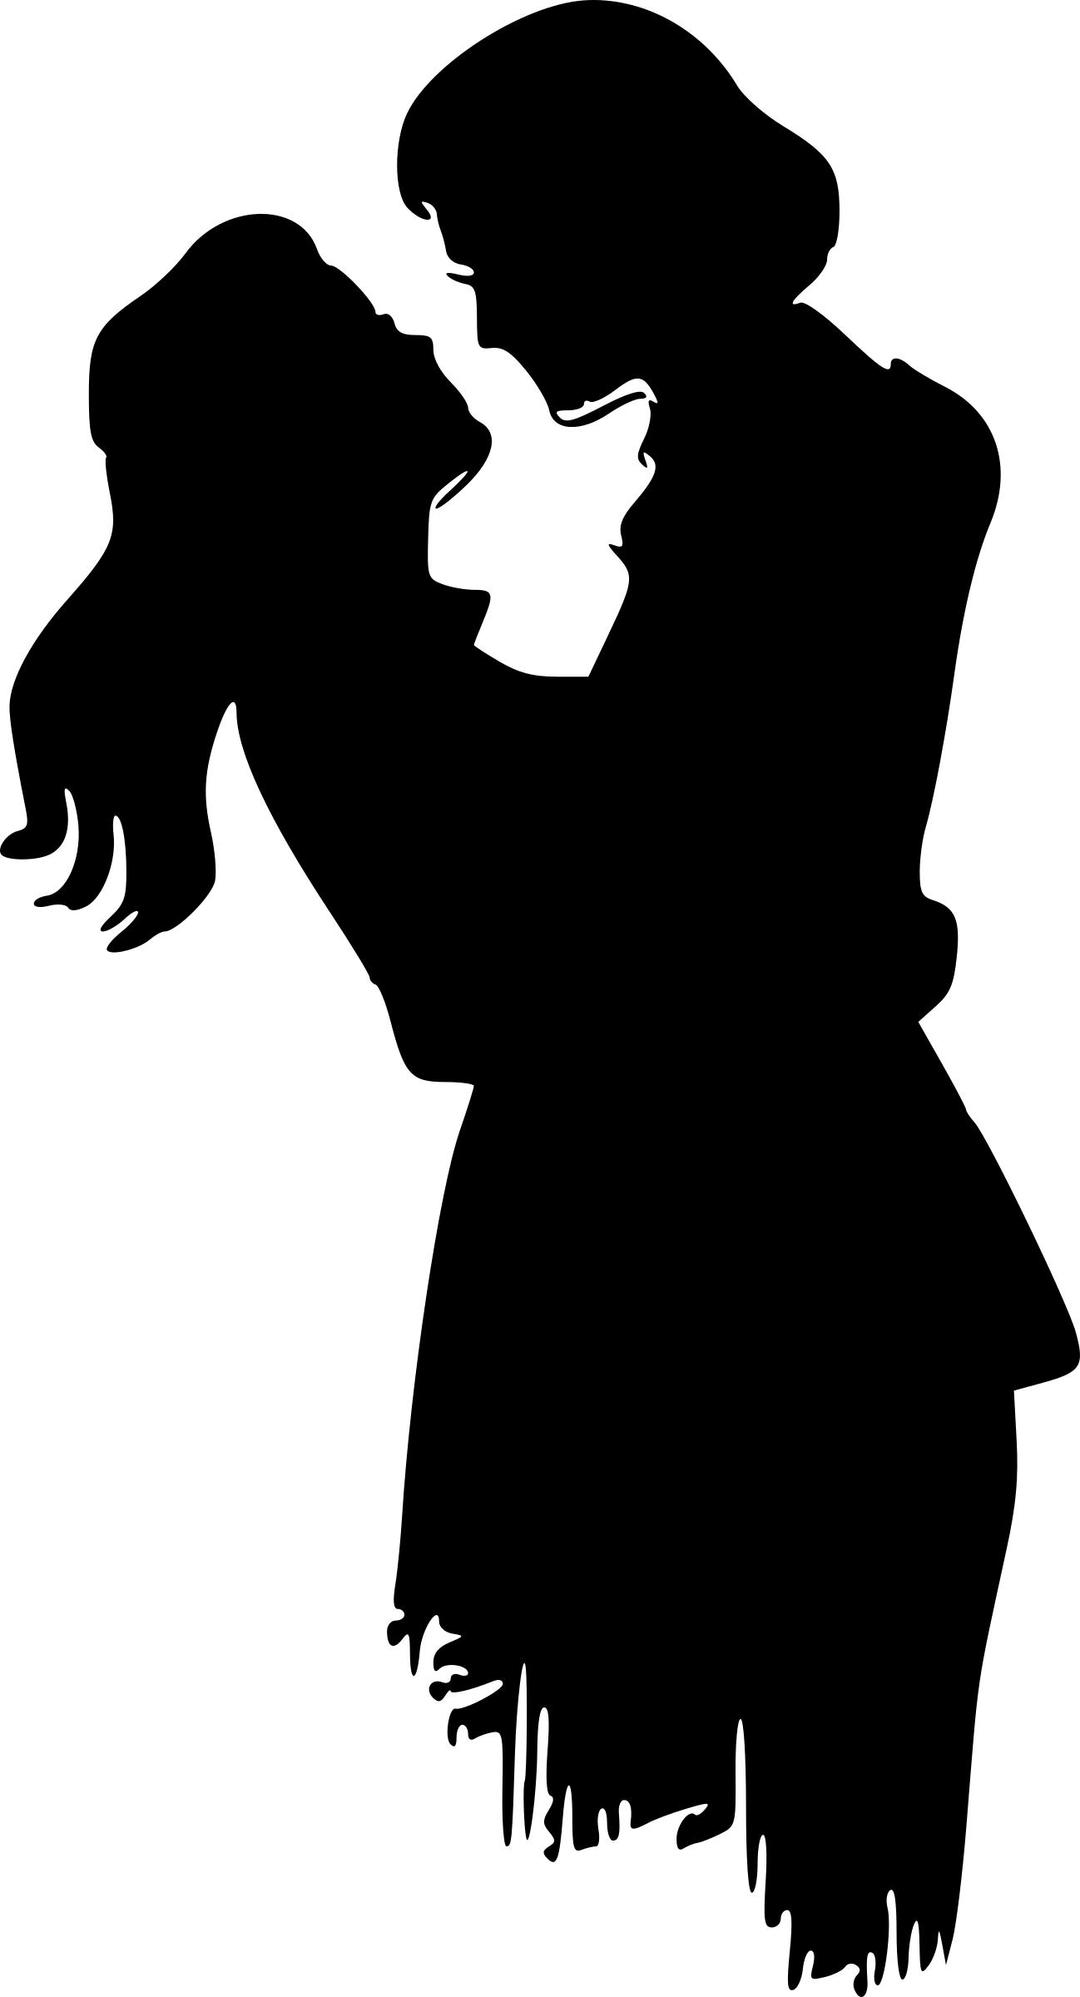 Lovers silhouette png transparent